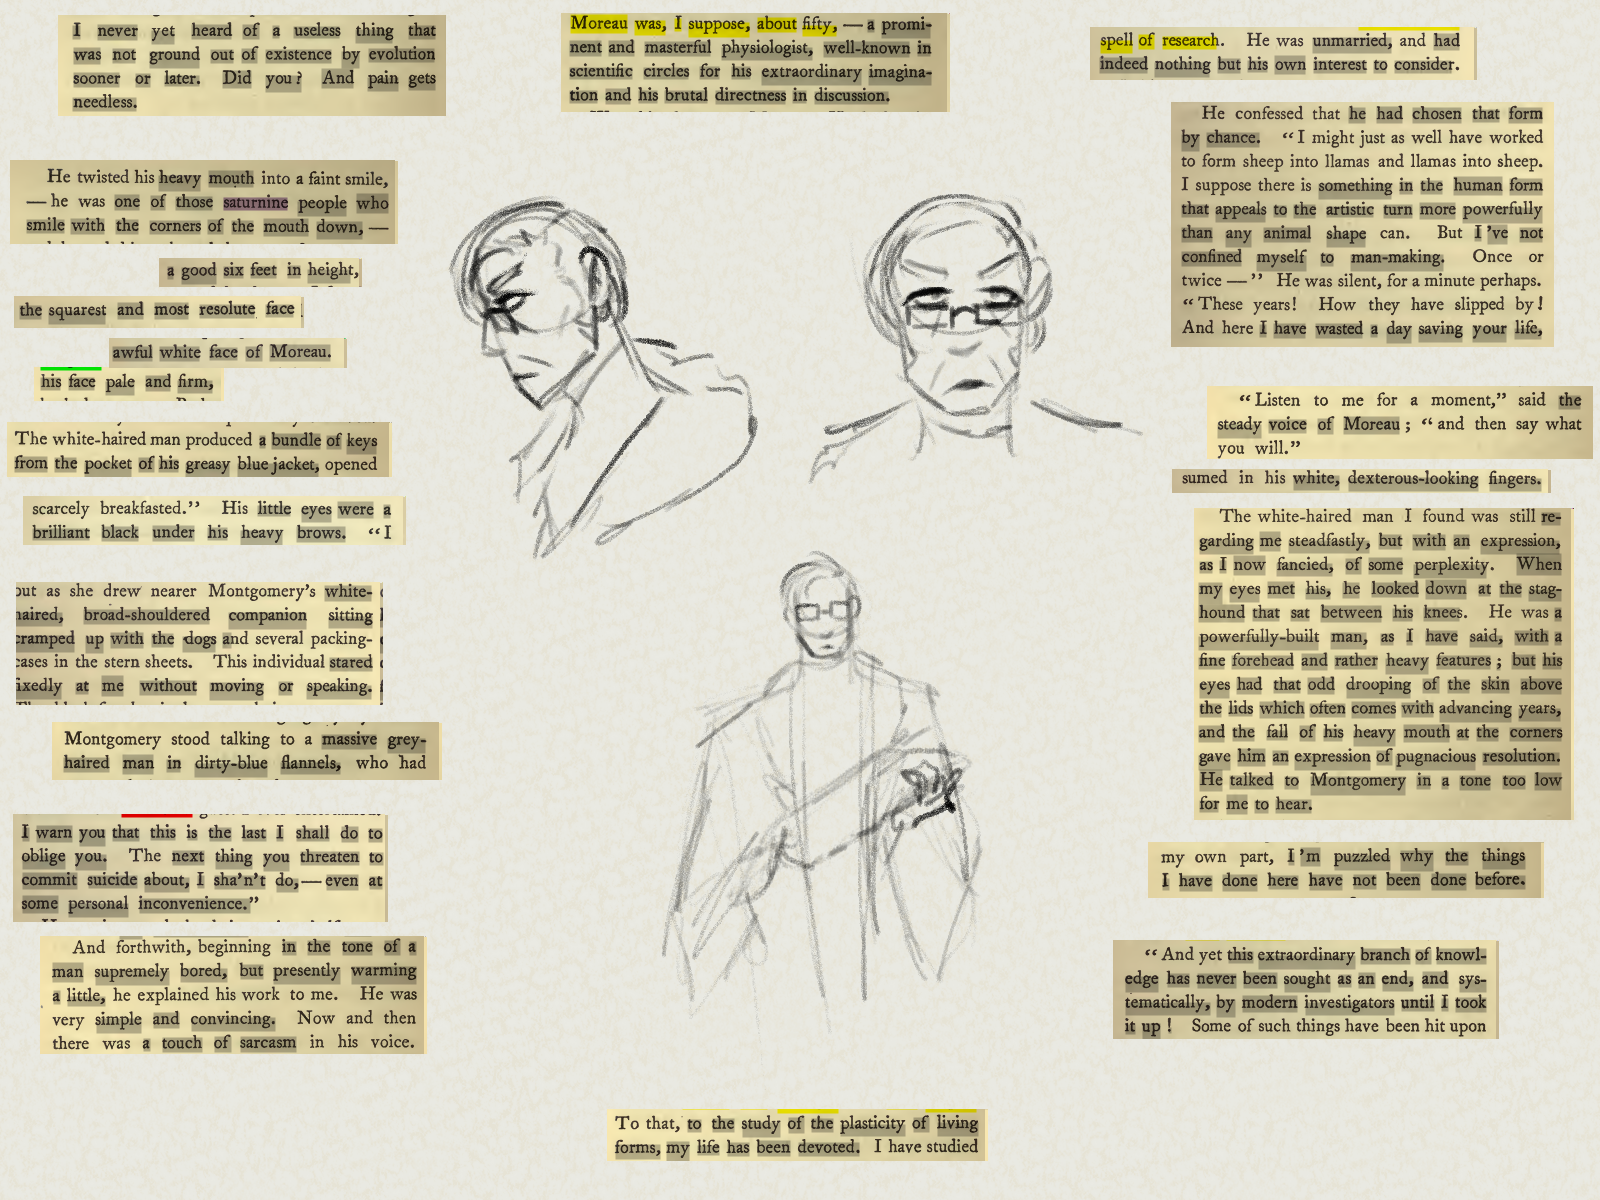 Sketches of Doctor Moreau, an older-looking woman. She has a square face, short hair, glasses, and a large coat. Two sketches show her face, front and profile, the third shows her holding a bonesaw. The sketches are surrounded with highlighted passages from the book, focusing on the original character's appearance and personality.